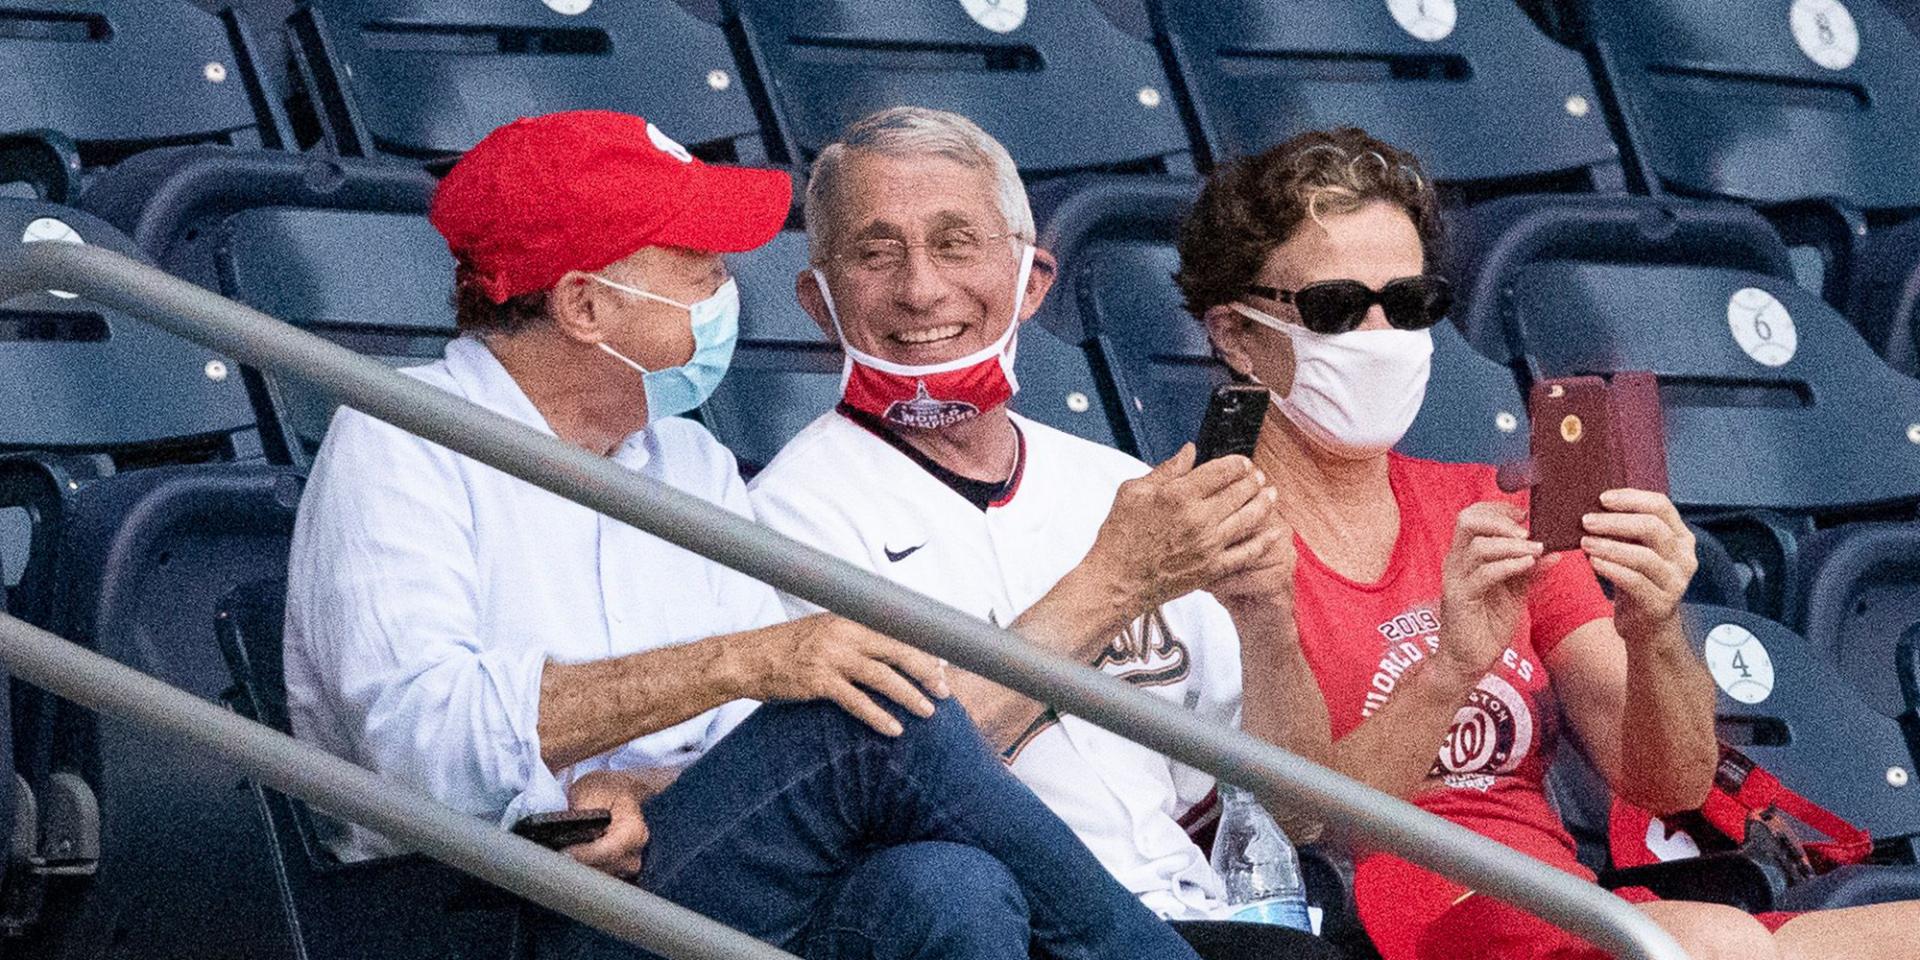 fauci-without-mask-nationals-game-DO-NOT-REUSE